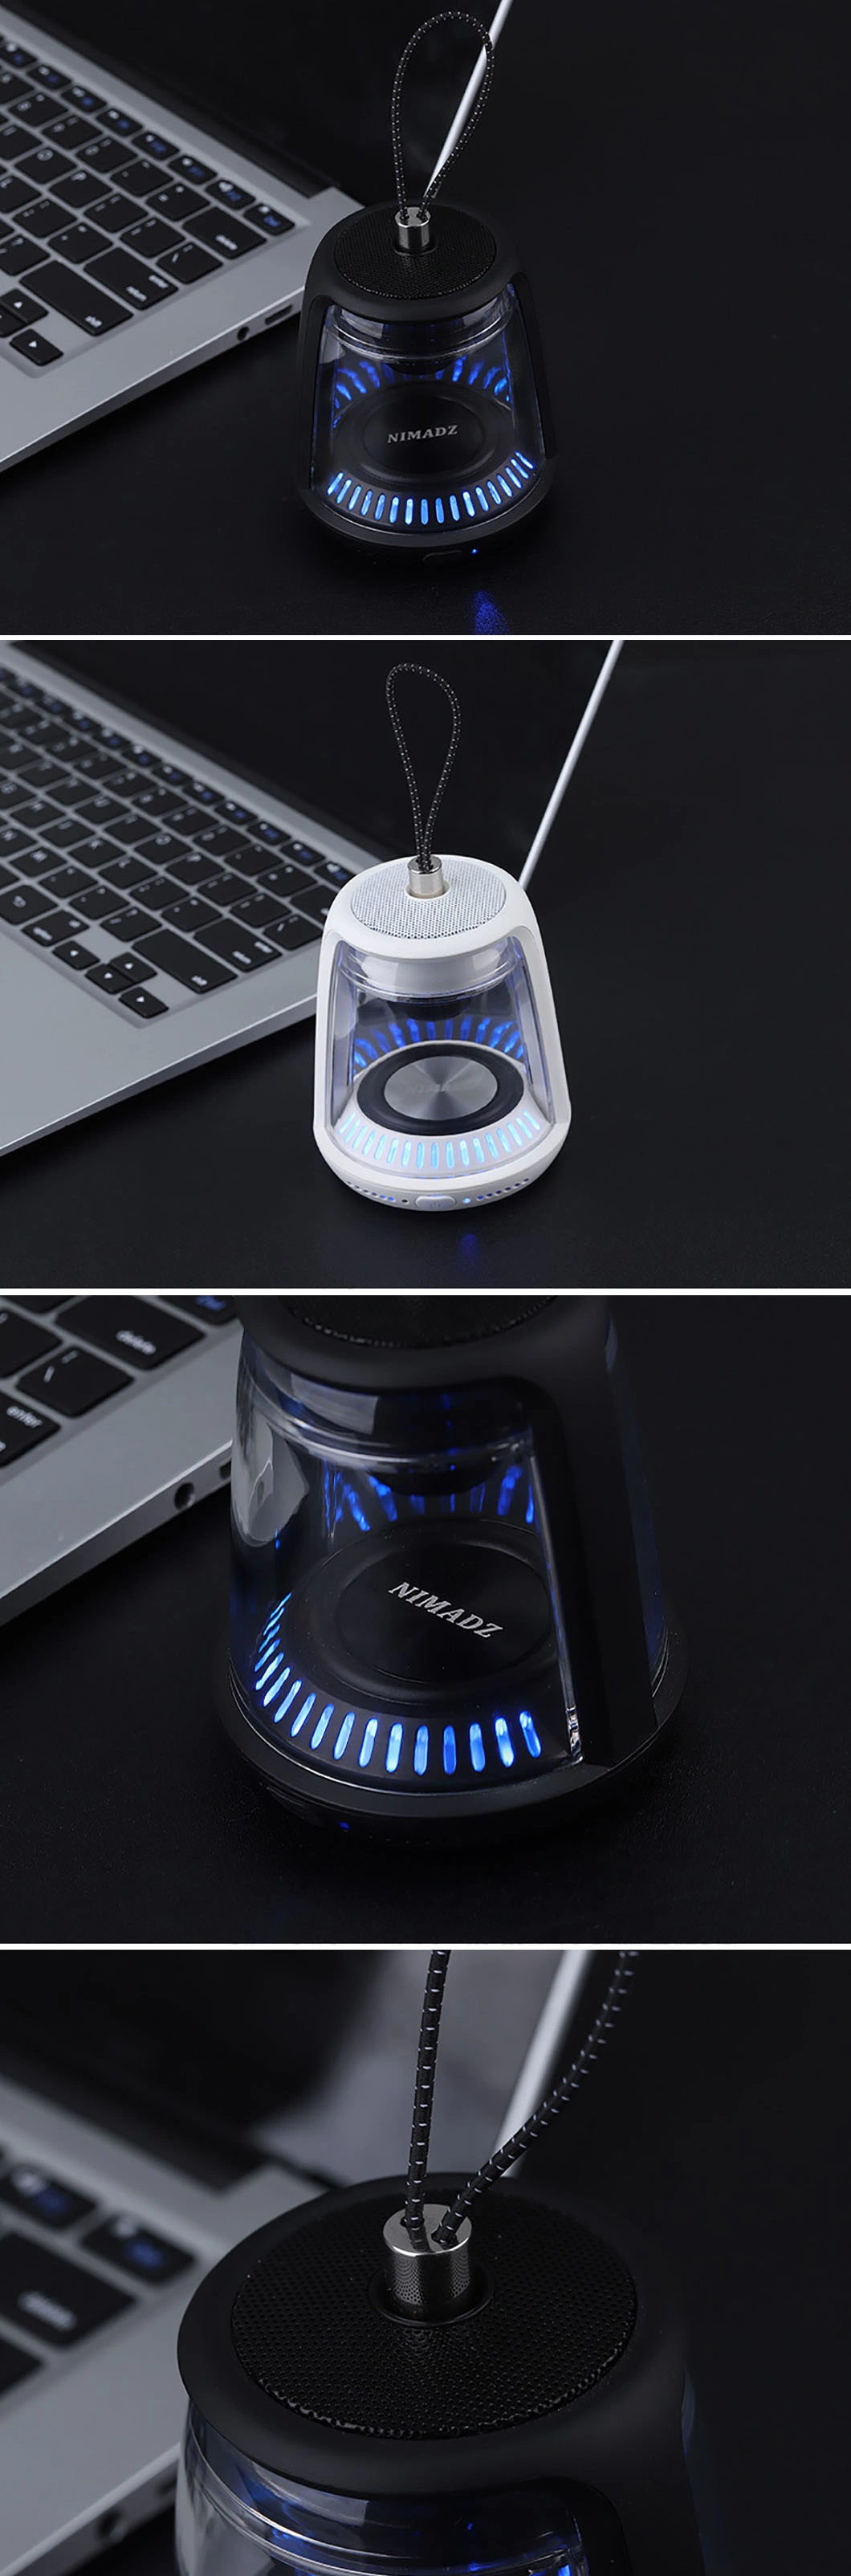 The Global Latest Technology Waterproof Lighthouse Wireless Speakers Portable